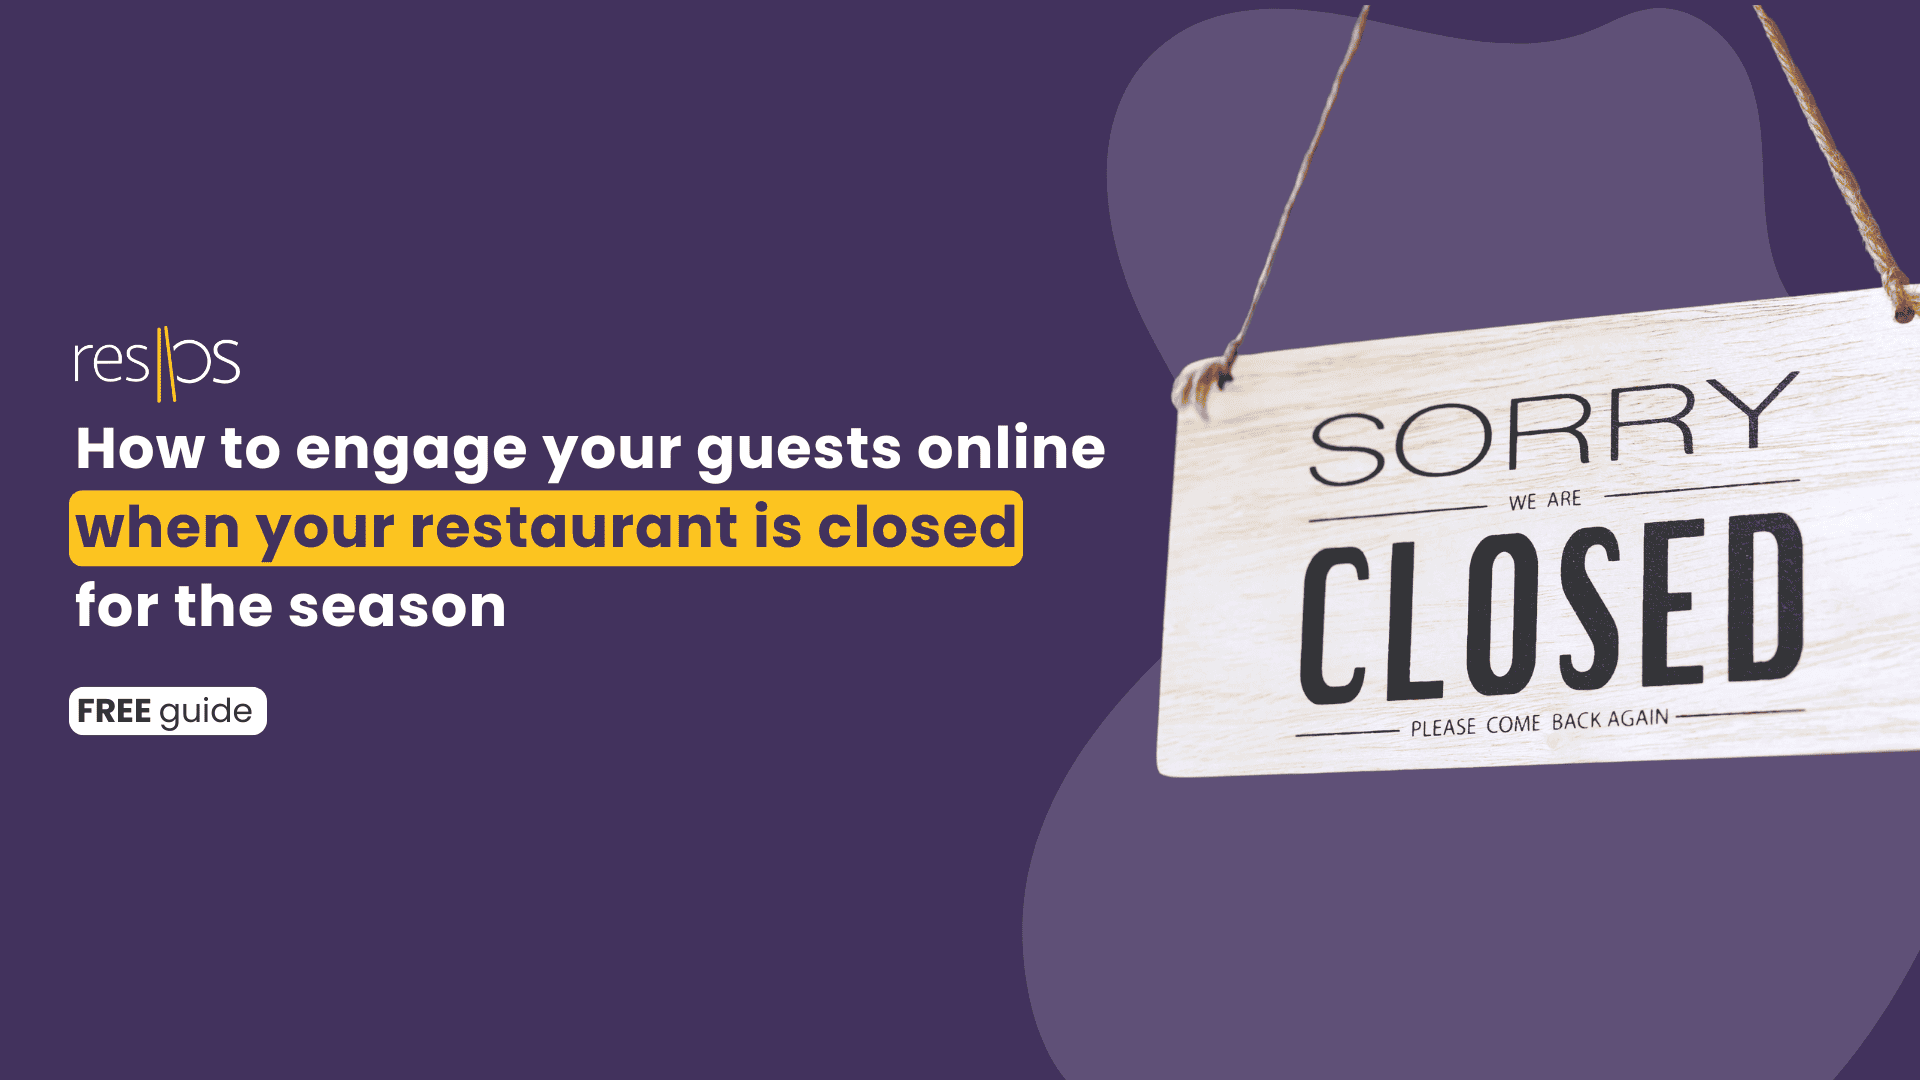 How to engage your guests online when your restaurant is closed for the season